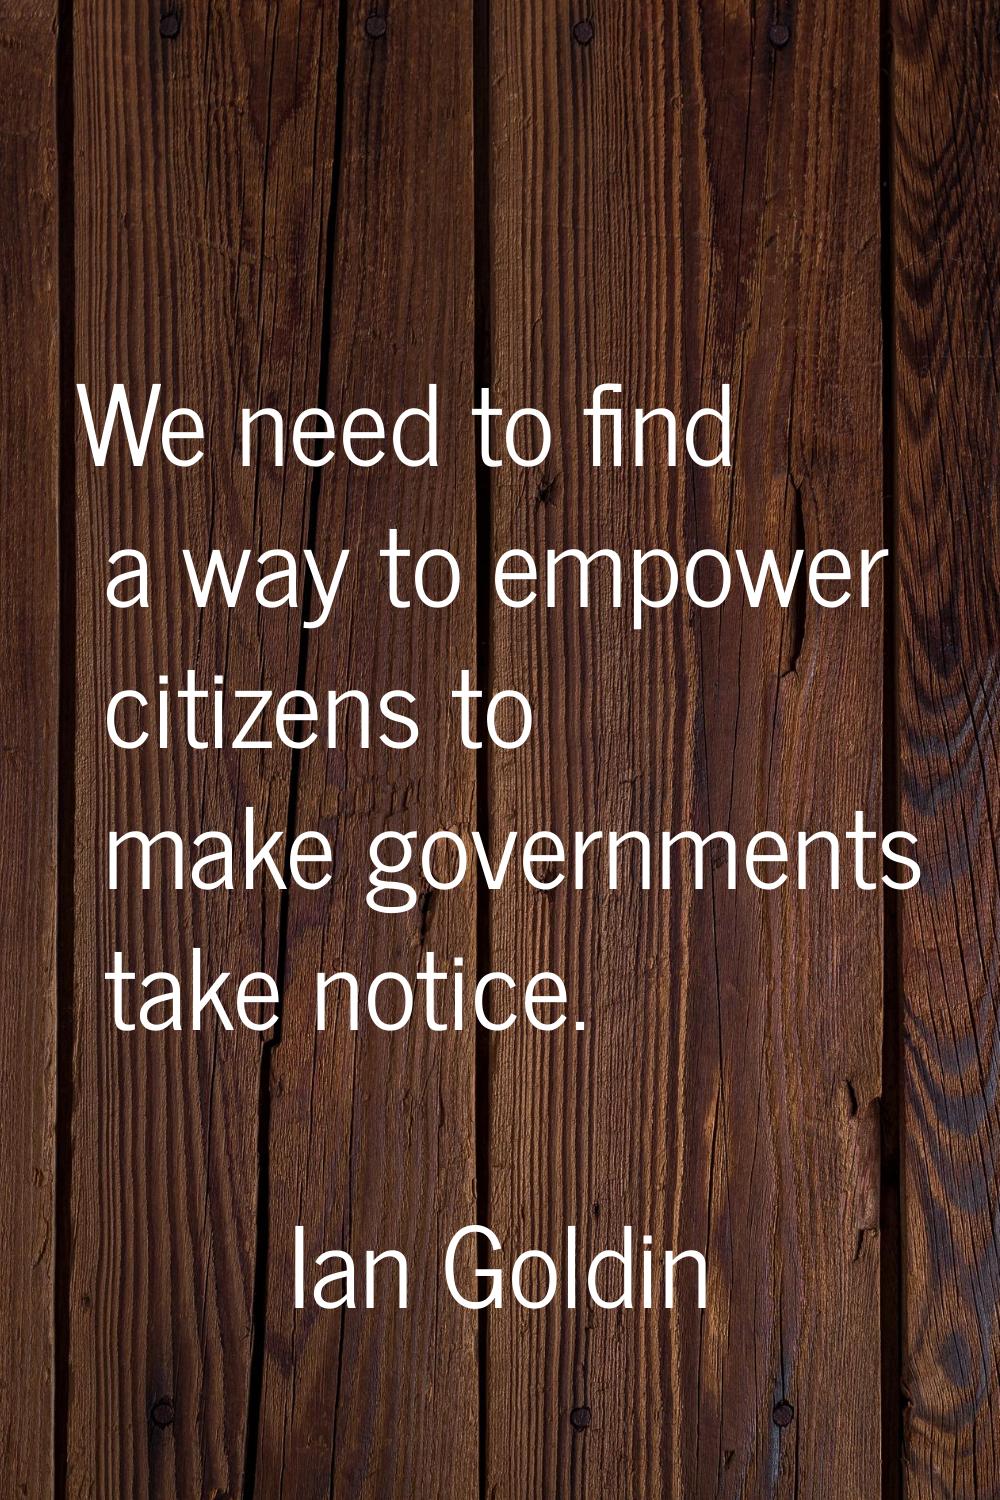 We need to find a way to empower citizens to make governments take notice.